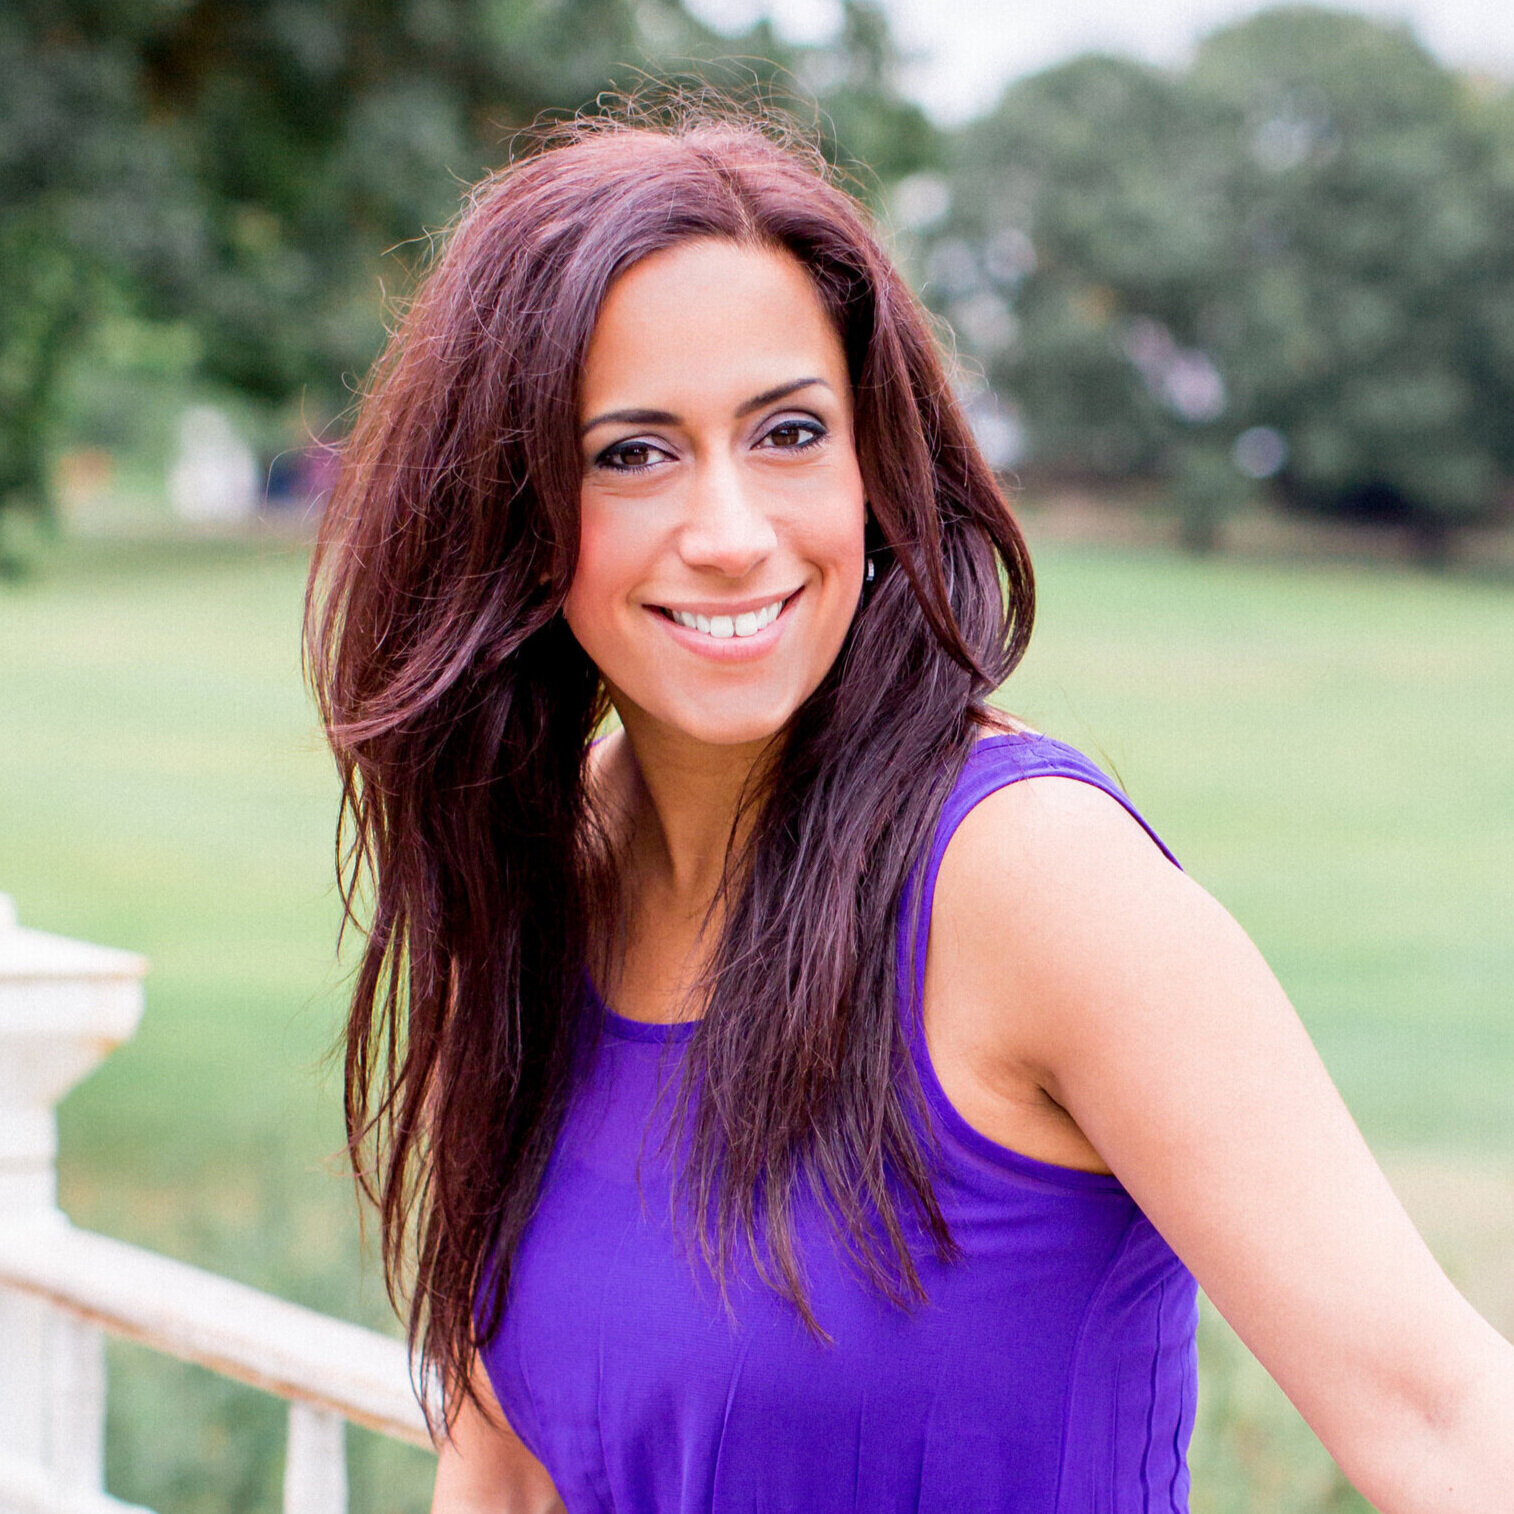 Tania DiggoryFounder, Director and Workplace wellness Trainer -